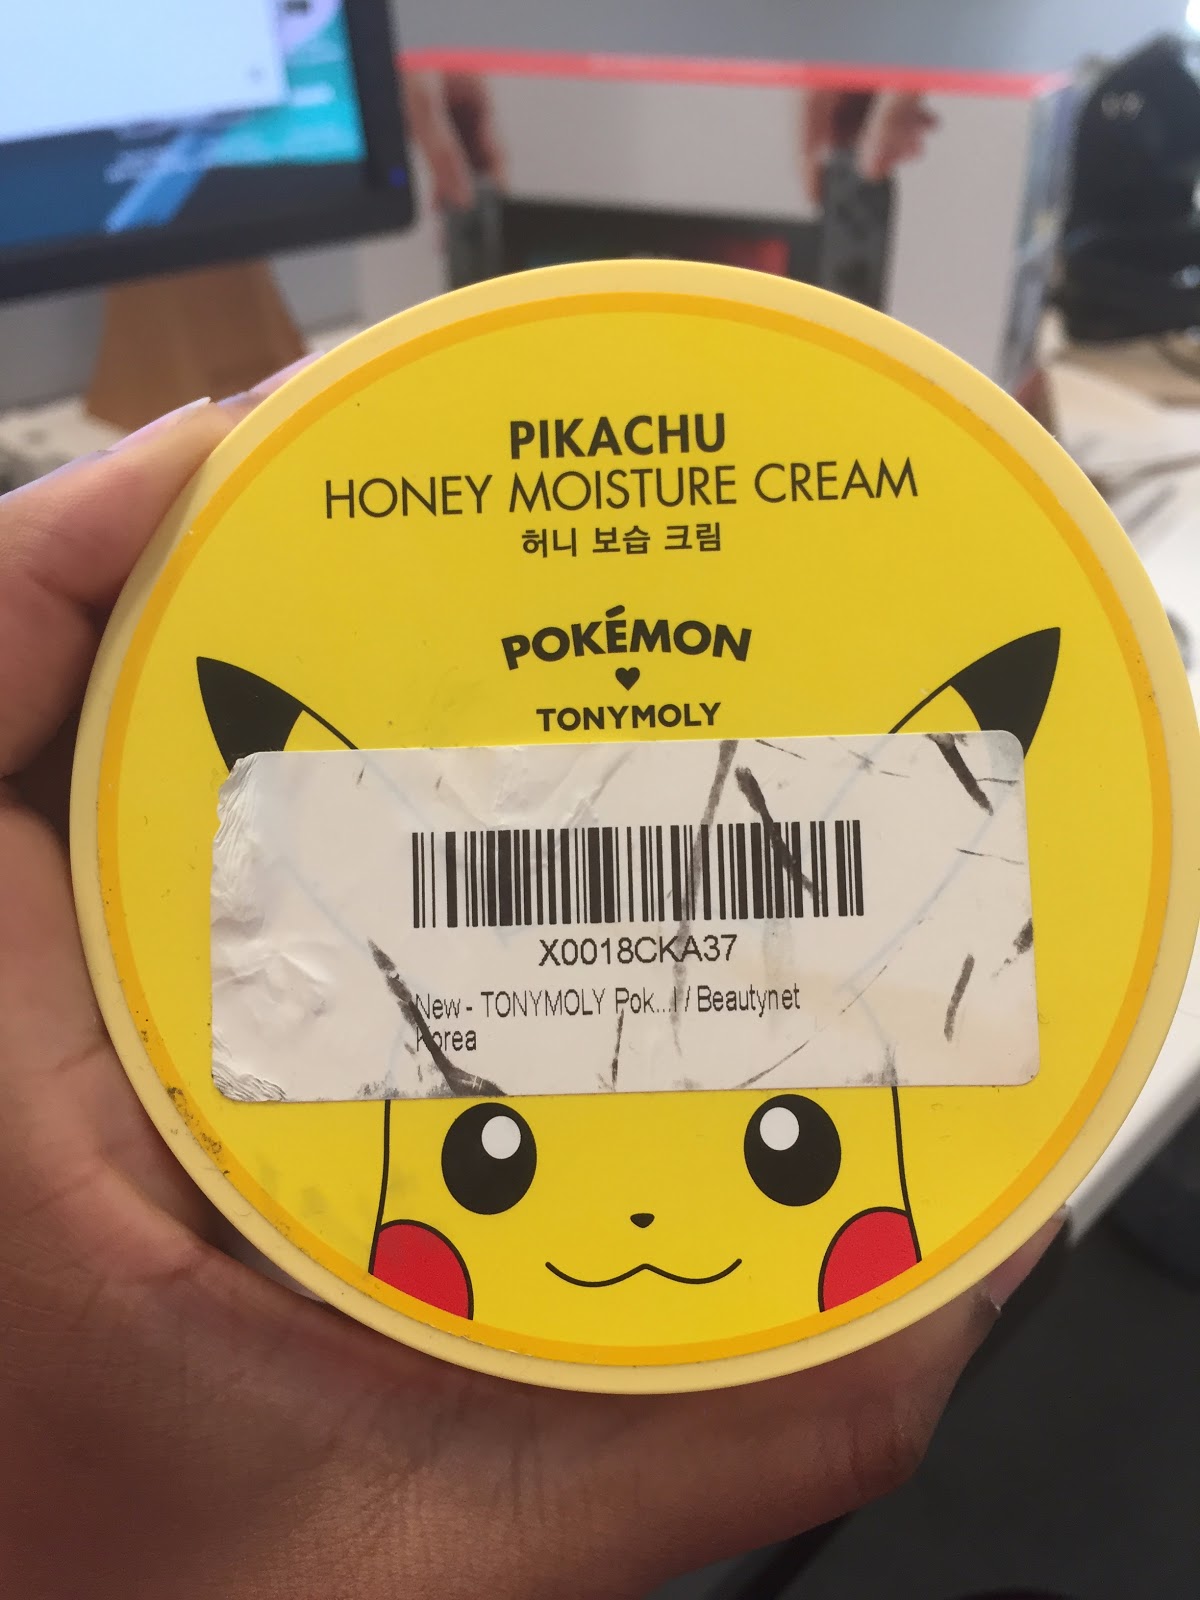 The Pokemon Skincare Collection Is Bad